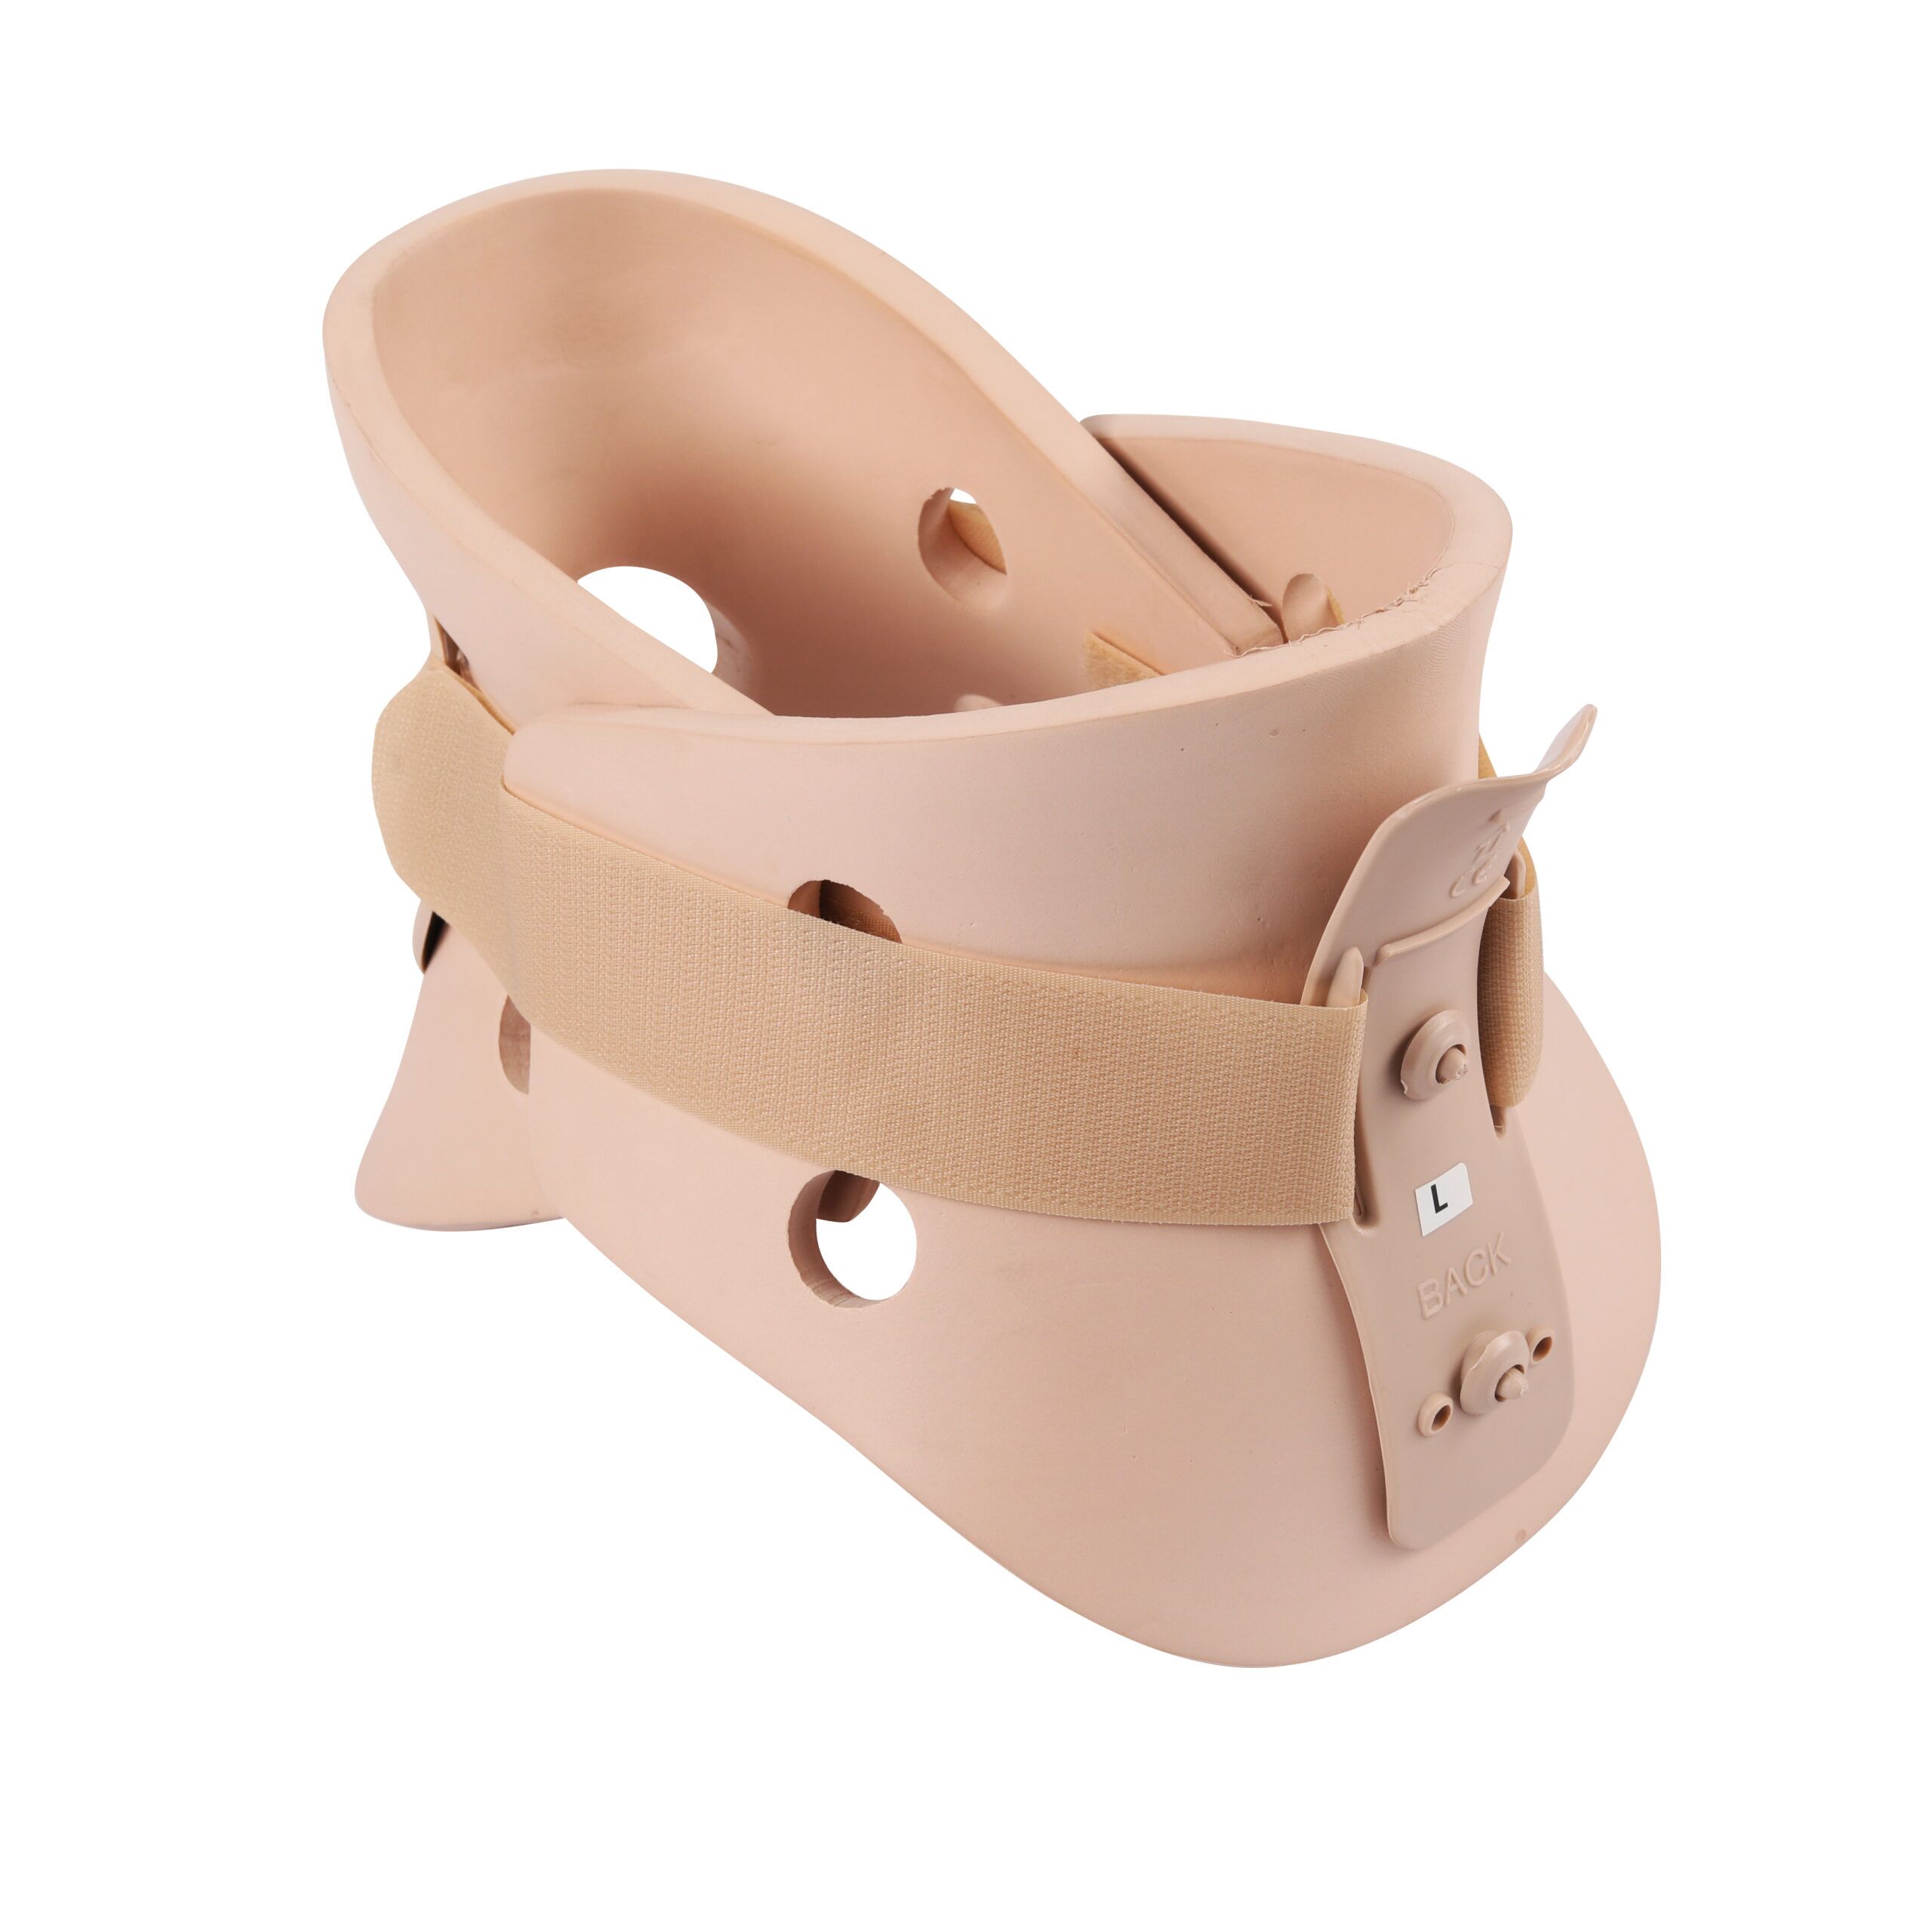 Tynor Cervical Collar Soft Medium, 1 Count Price, Uses, Side